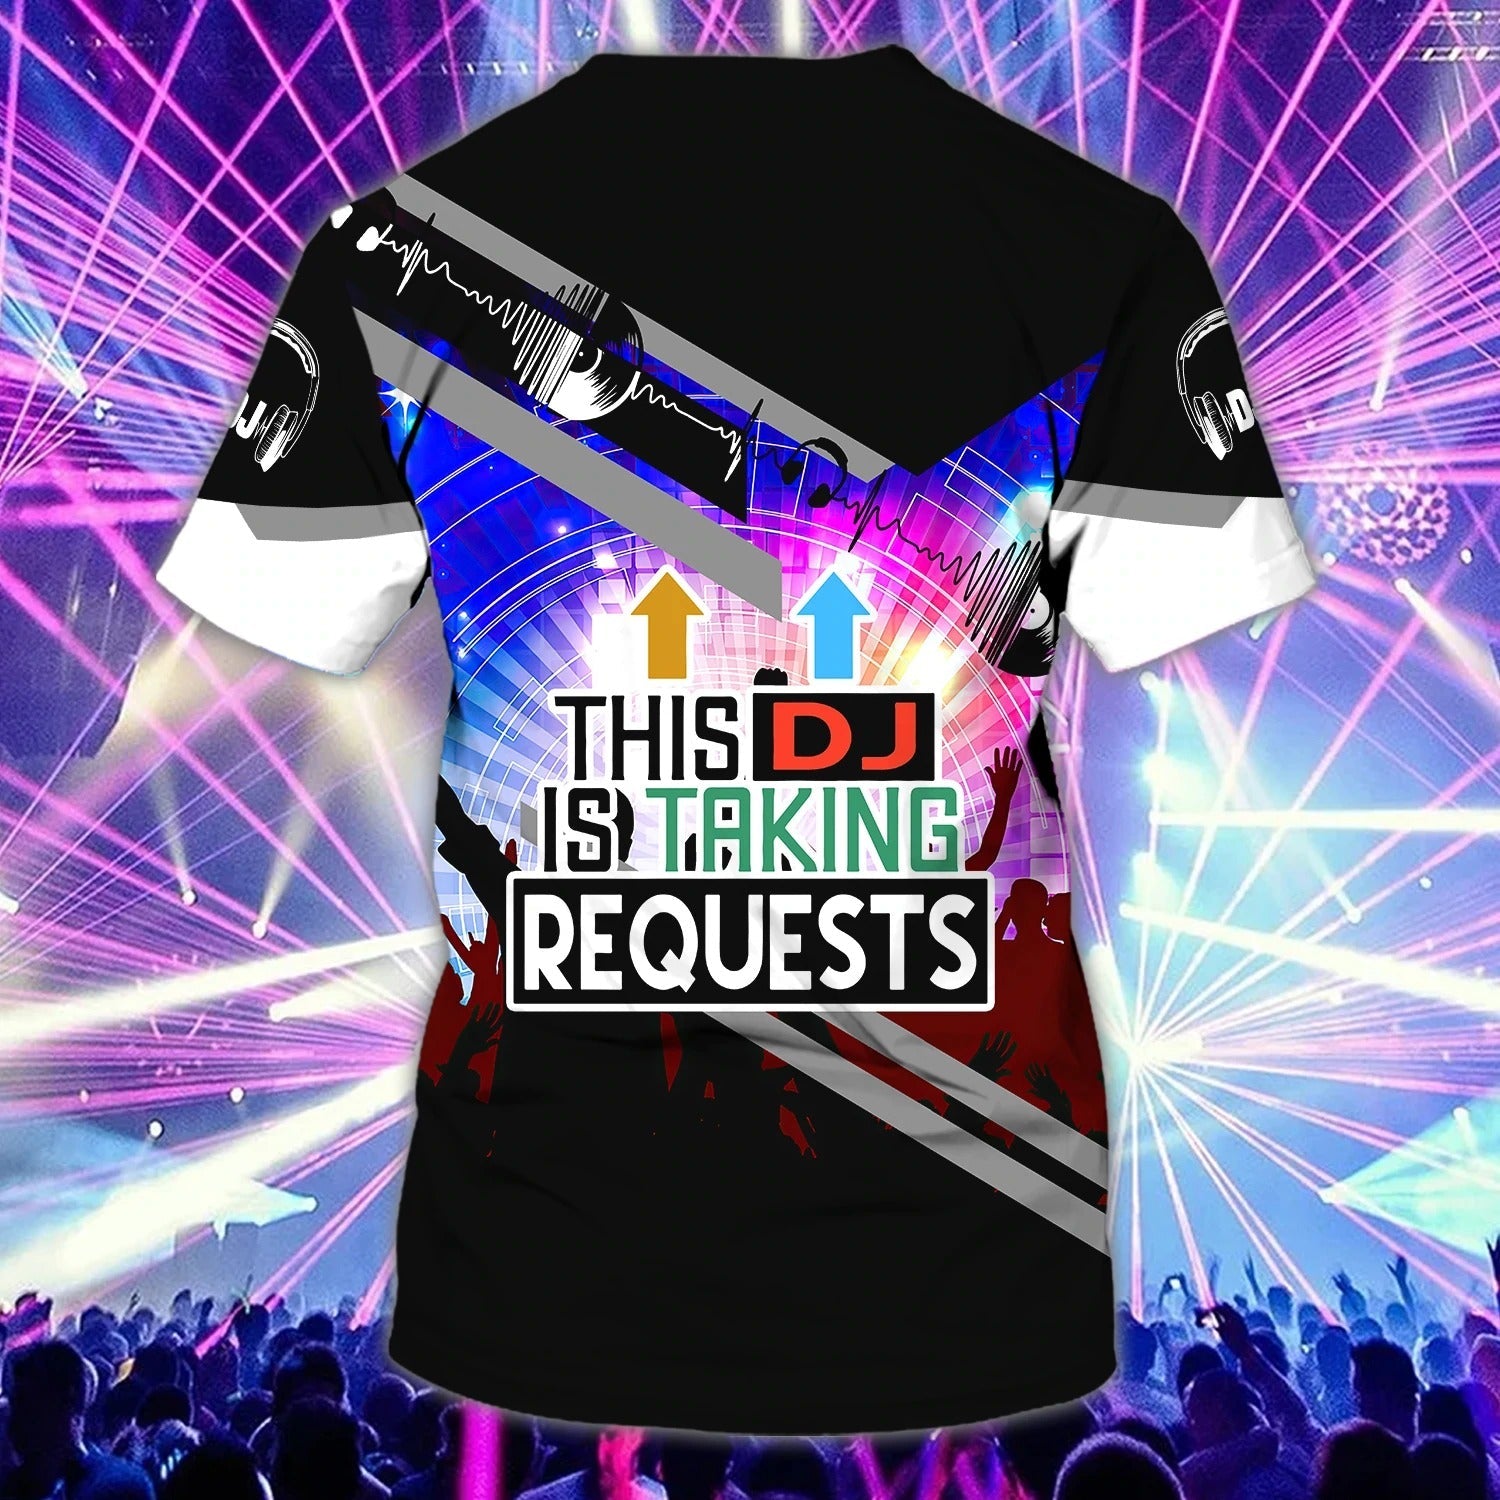 Customized With Name Colorful 3D T Shirt For Dj/ Unisex 3D Deejay Tee Shirts/ Musican Playing Dj Shirts